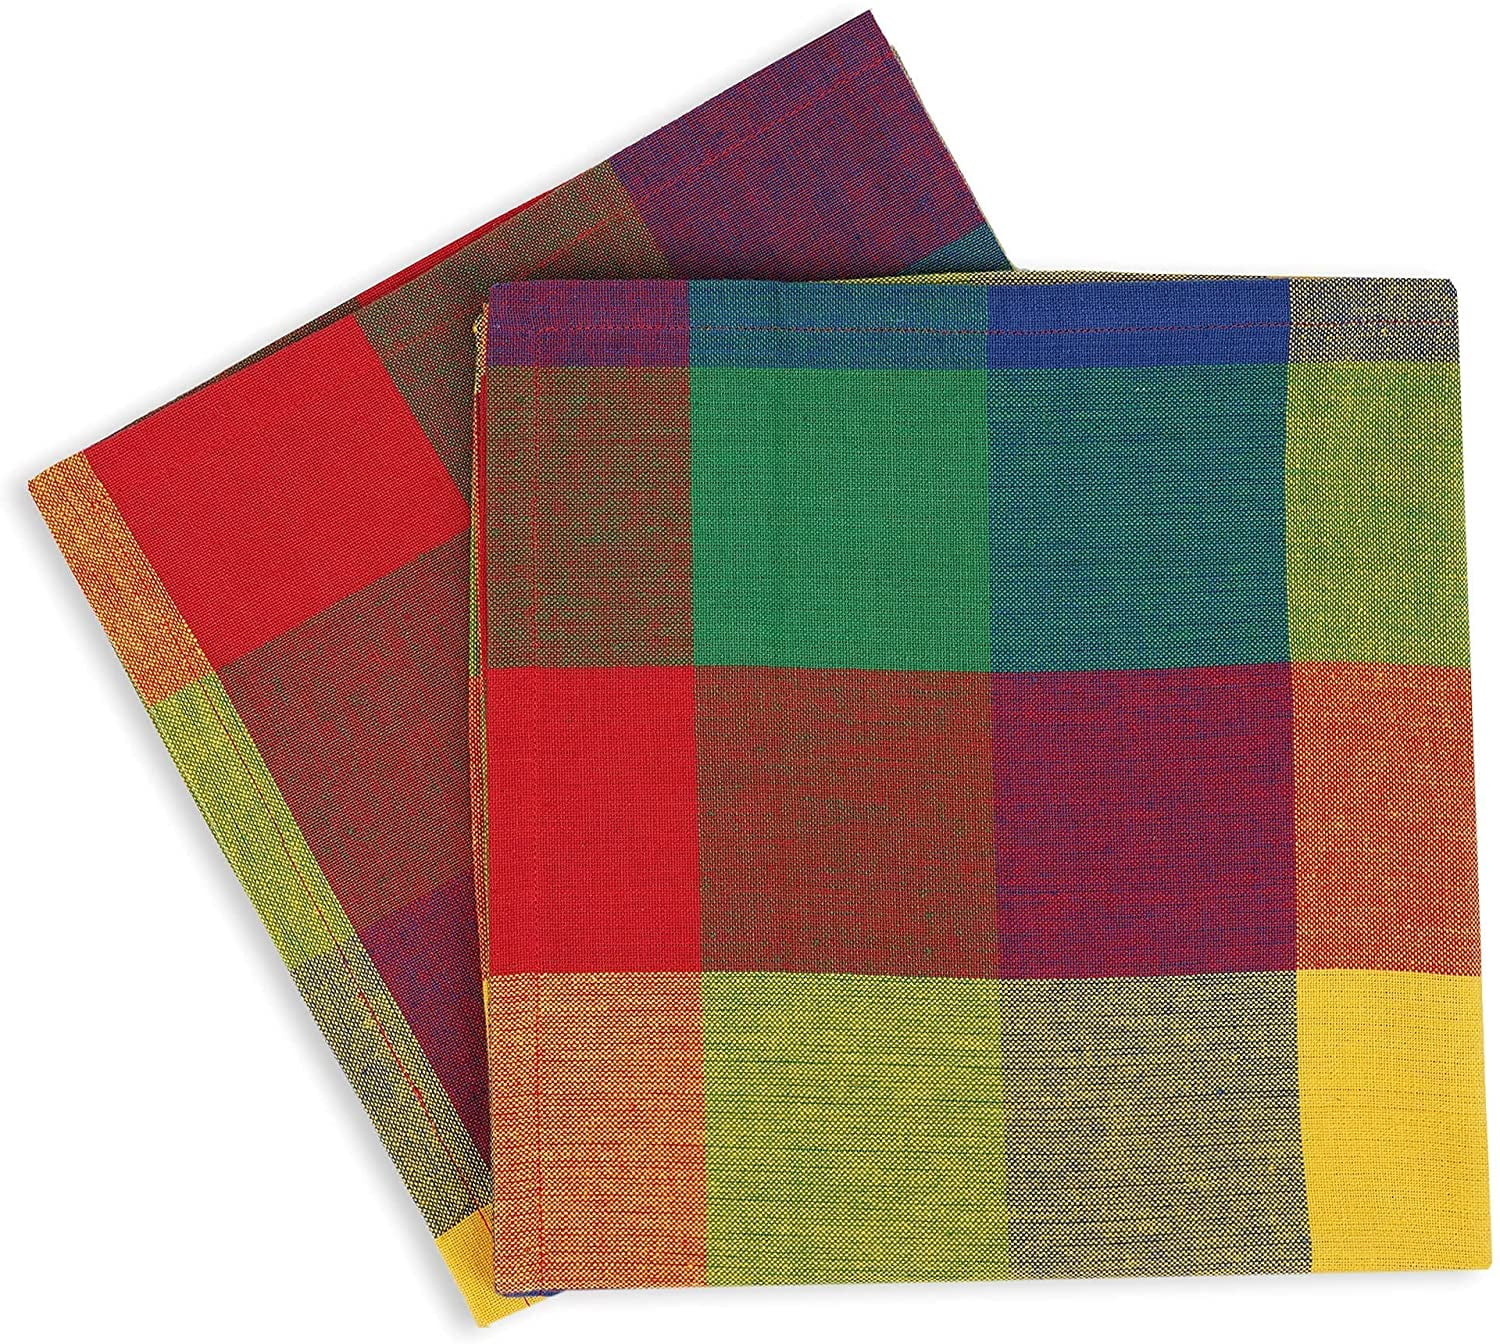 Heavy weight fabric for daily use with Mitered corners finish Multicolors Multicolour Sweet Needle 20 IN x 20 IN Pack of 12-100% Cotton Oversized Dinner Napkins 50 CM x 50 CM 